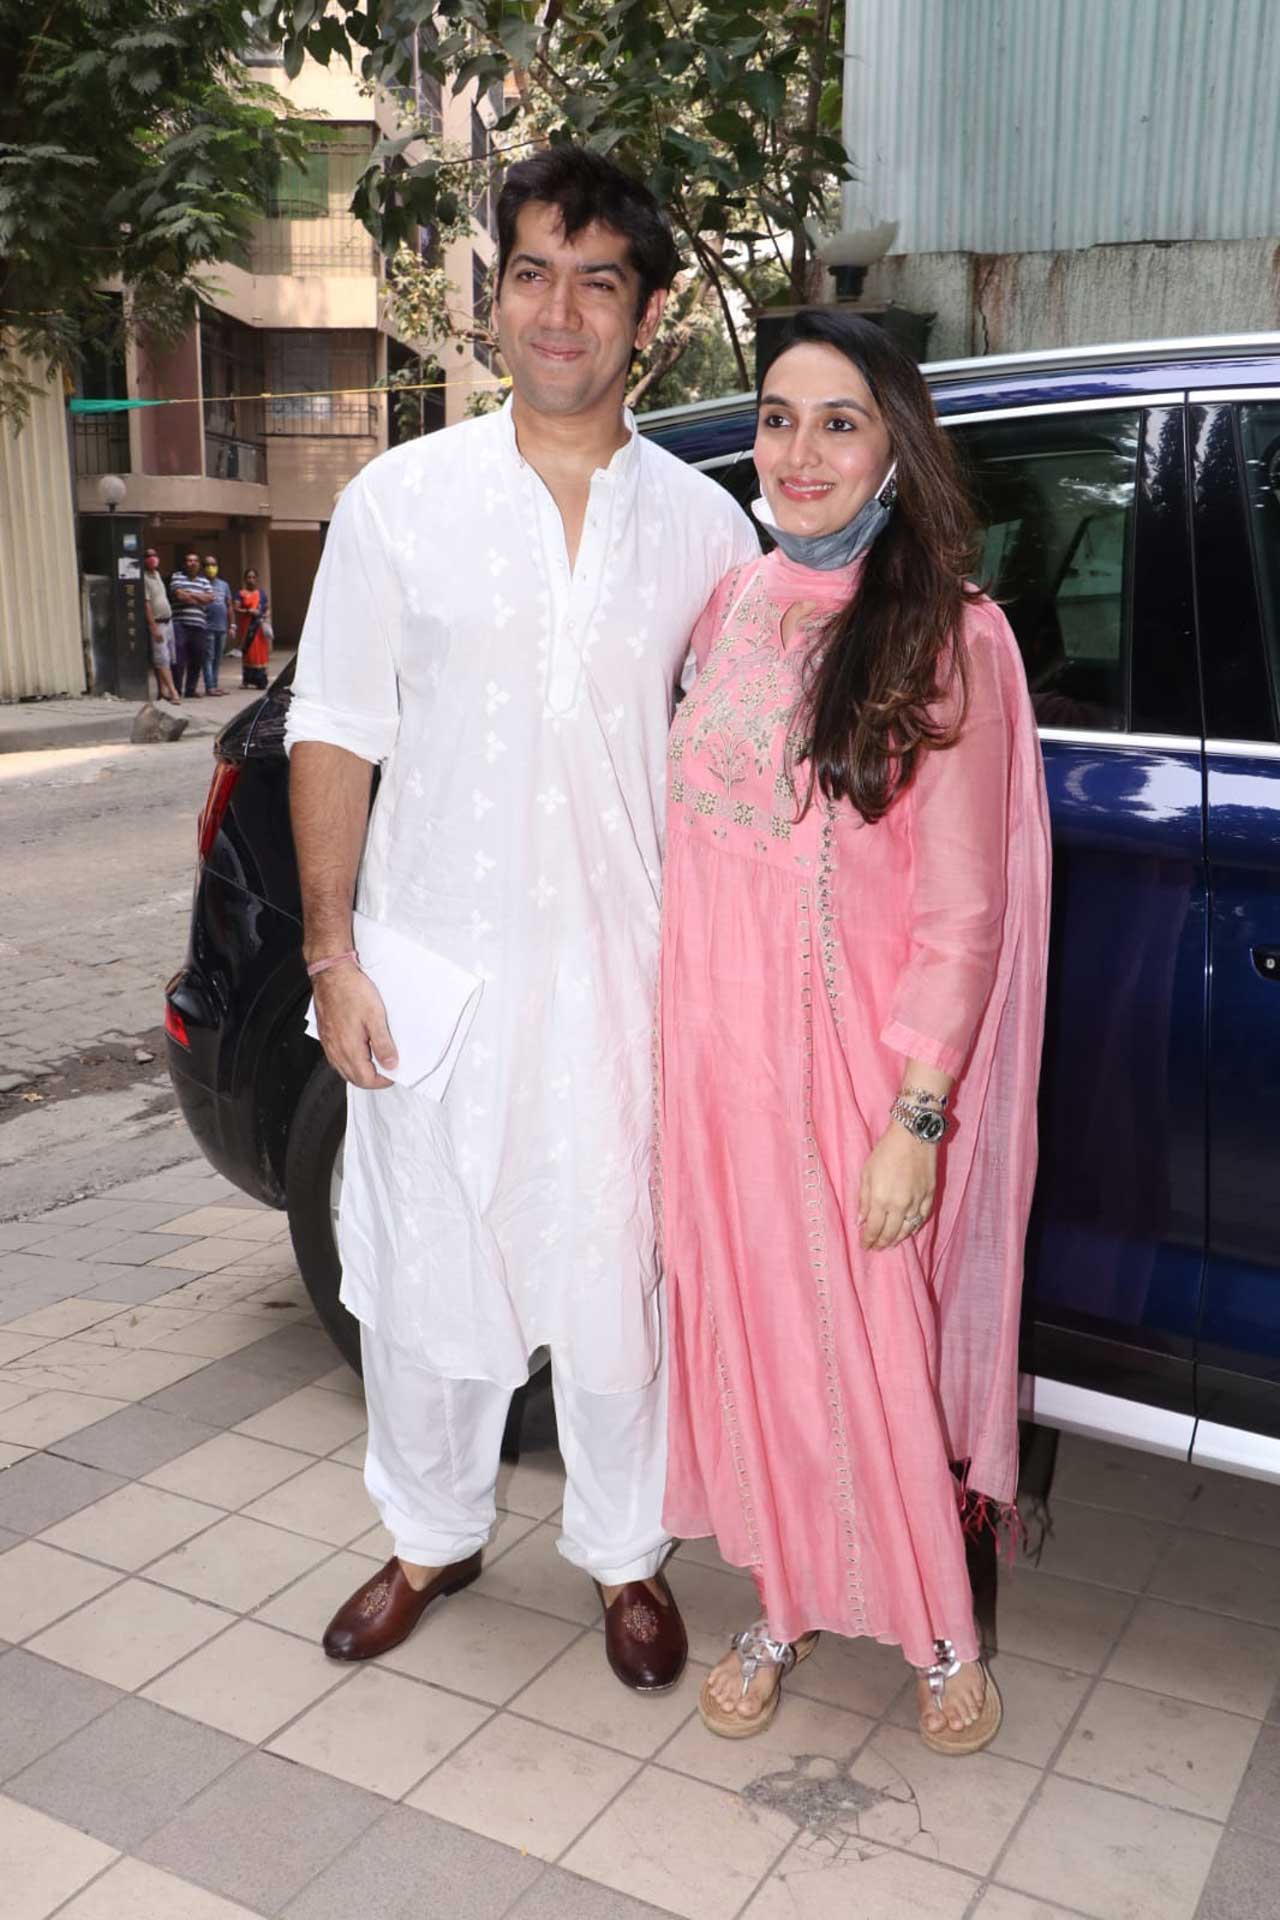 Varun's brother Rohit Dhawan and his wife Jaanvi also posed for the paparazzi. Rohit wore a white kurta pyjama, while Jaanvi opted for a pink salwar kurta.  